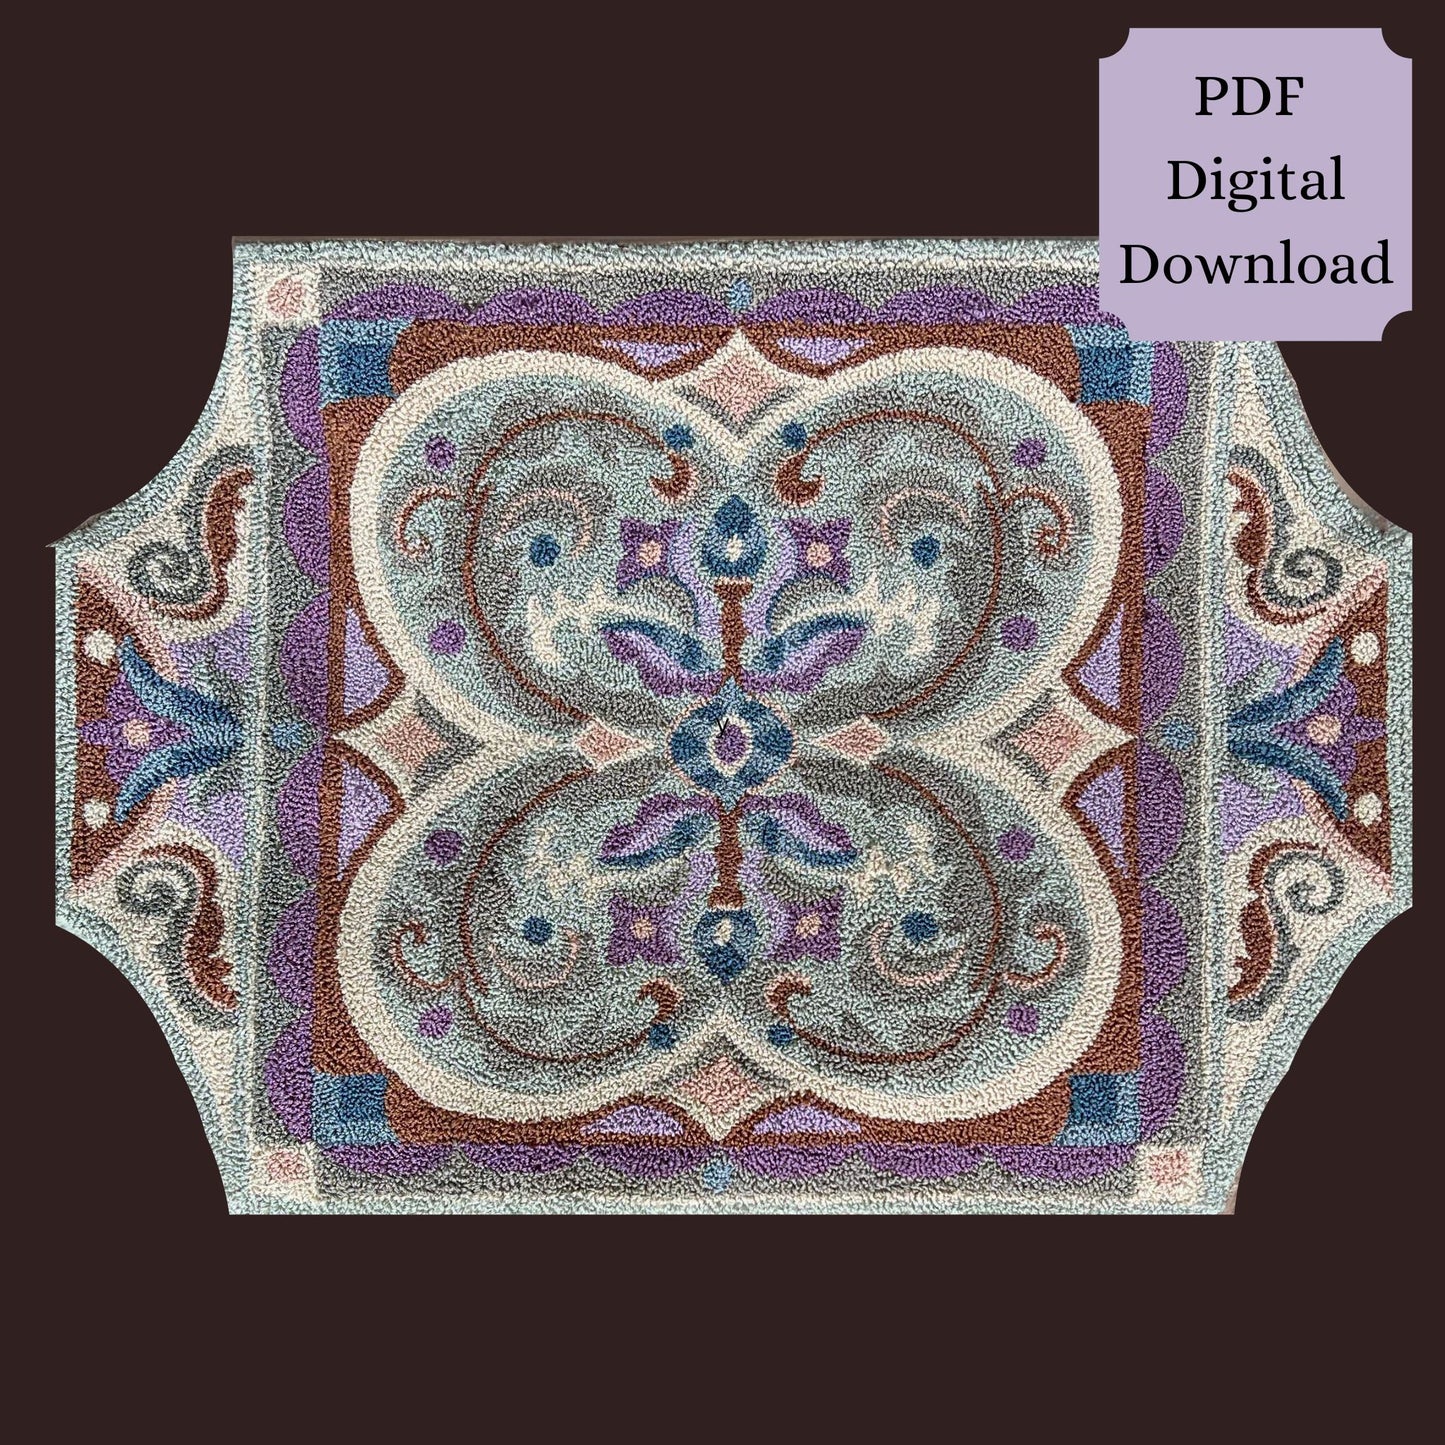  Misty Lavender- PDF Rug Hooking Digital Download Pattern by Orphaned Wool. This is a 5 page download pattern file of a lovely detail rug hooking pattern, size suggestion and helpful information is included in this download. Copyright © 2023 Kelly Kanyok